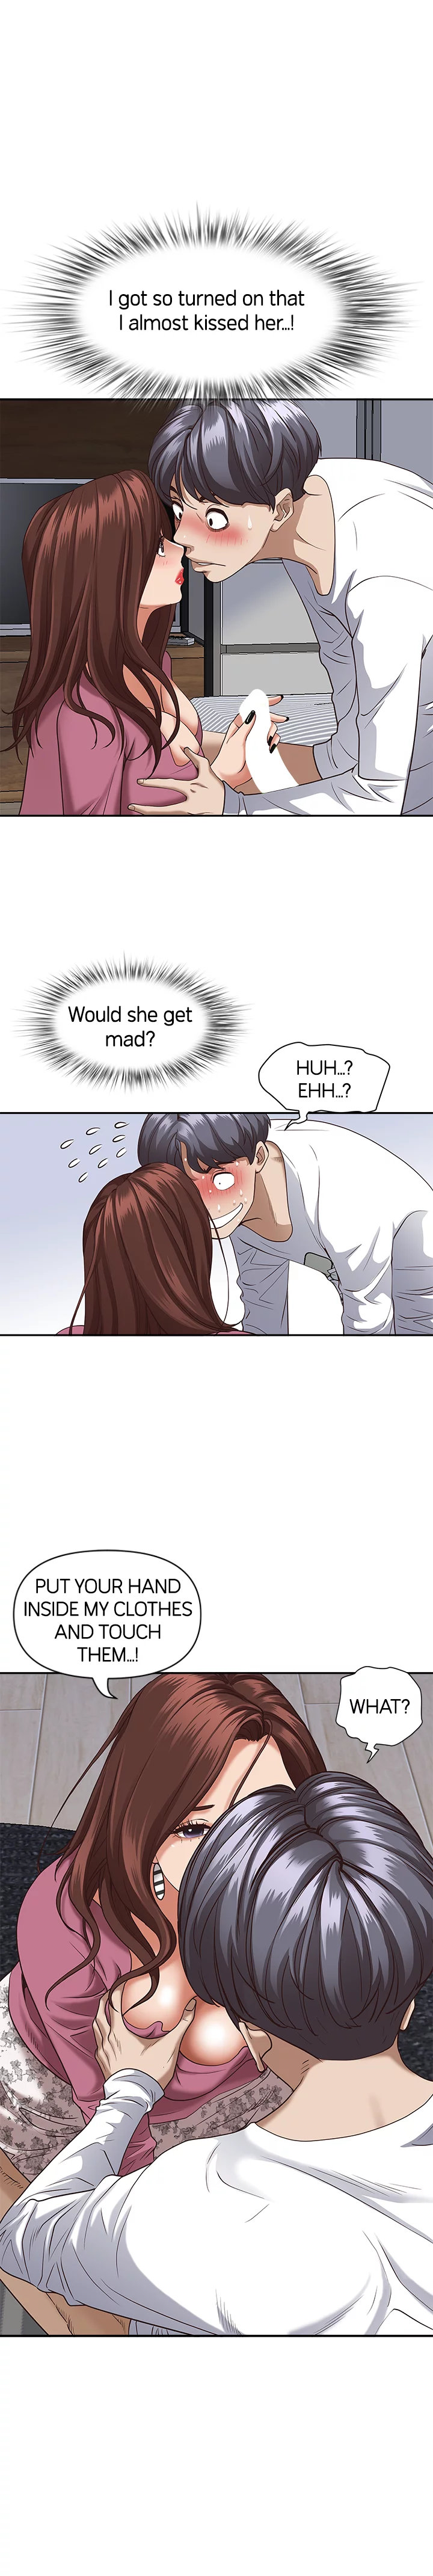 Living With a MILF - Chapter 17 - Read Manhwa, Manhwa hentai, Adult Manhwa,  Manhwa 18, Hentai Webtoon, Hentai Manhwa, Hentai Manga, Hentai Comics